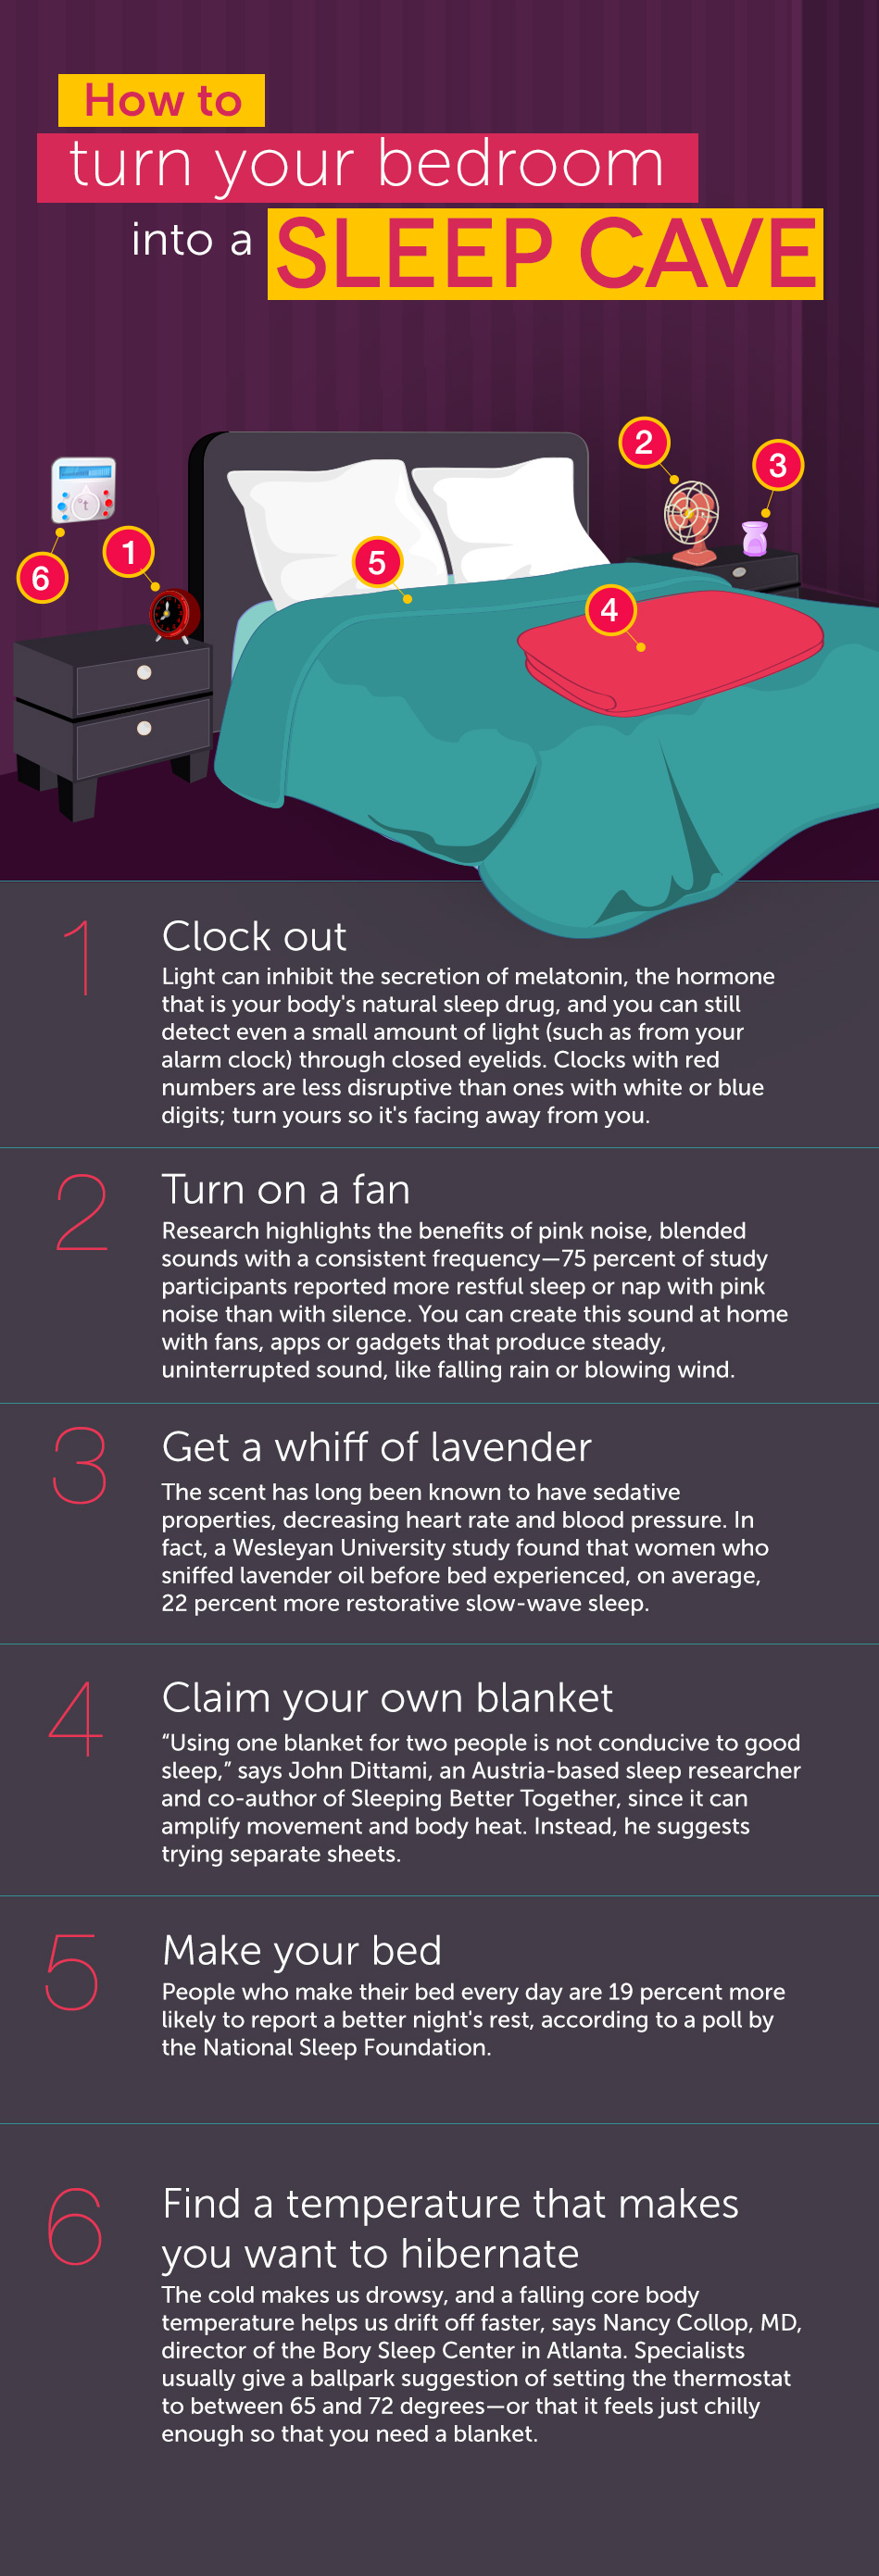 How To Turn Your Bedroom Into A Sleep Cave